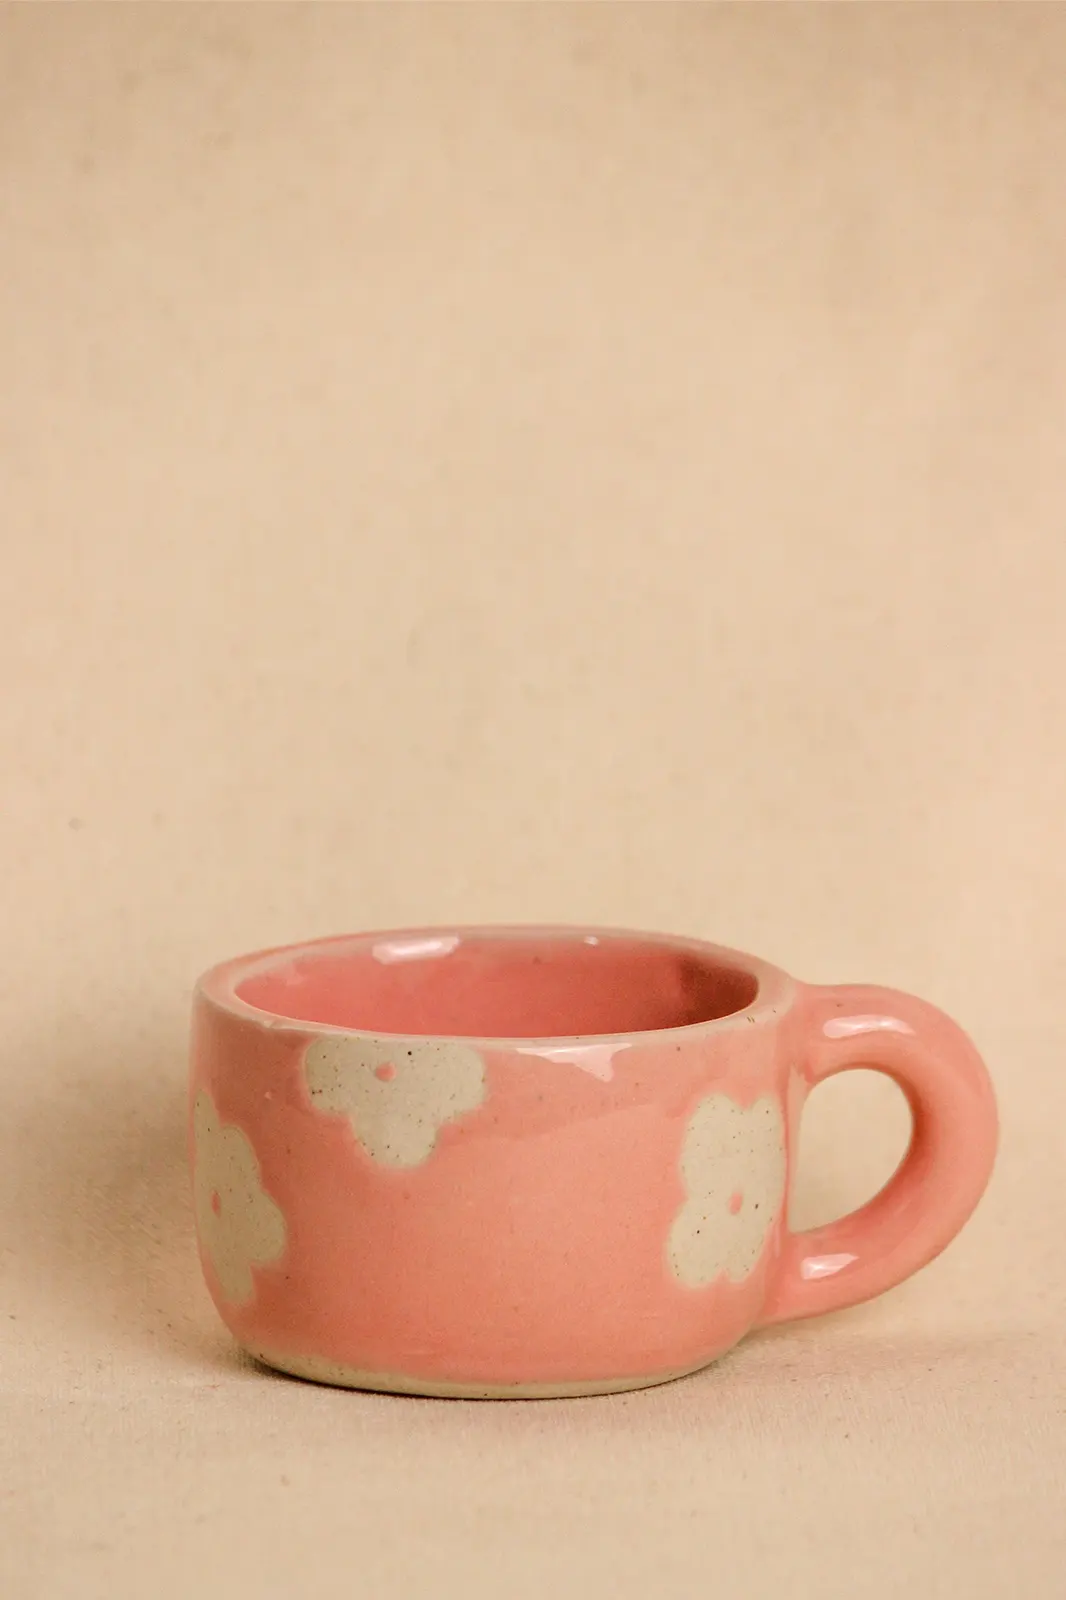 Pretty in pink ceramic daisy cup wiithout saucer, pink cup, ceramic cup, tea cup, ceramic tea cup, coffee cup, eco friendly coffee cup, hand painted cup, ceramic mugs, coffee mug, eco friendly mugs, hand painted mug, handmade mug, coffee mug ceramic, Toh, Sepia Stories, ceramic mug handmade, pink coffee cup, ceramic cups online